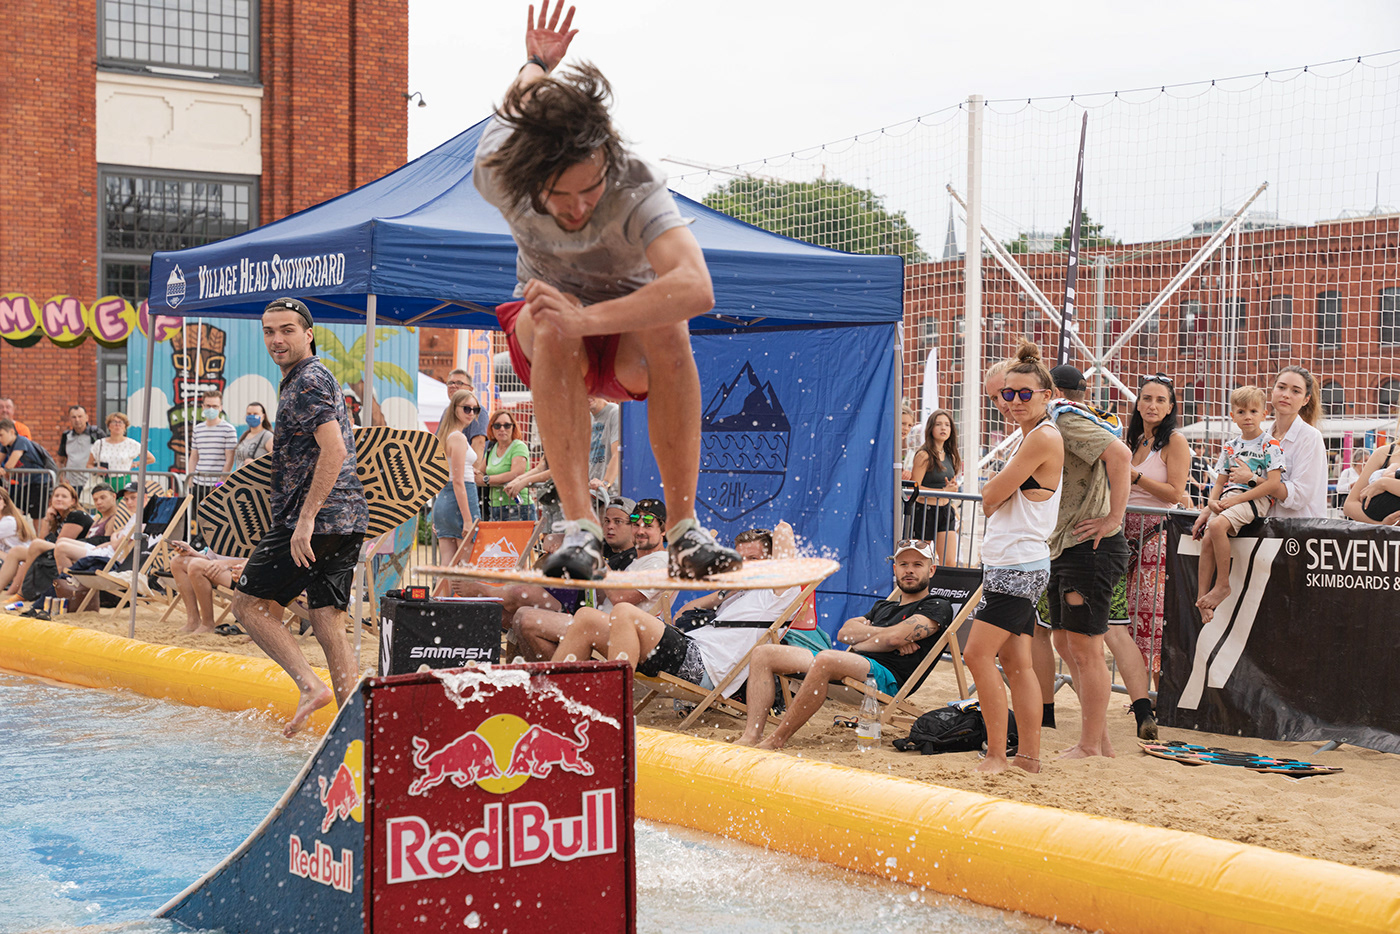 challenge Competition movement photographer Red Bull skimboard sport Sport Photography Tournament Watersports